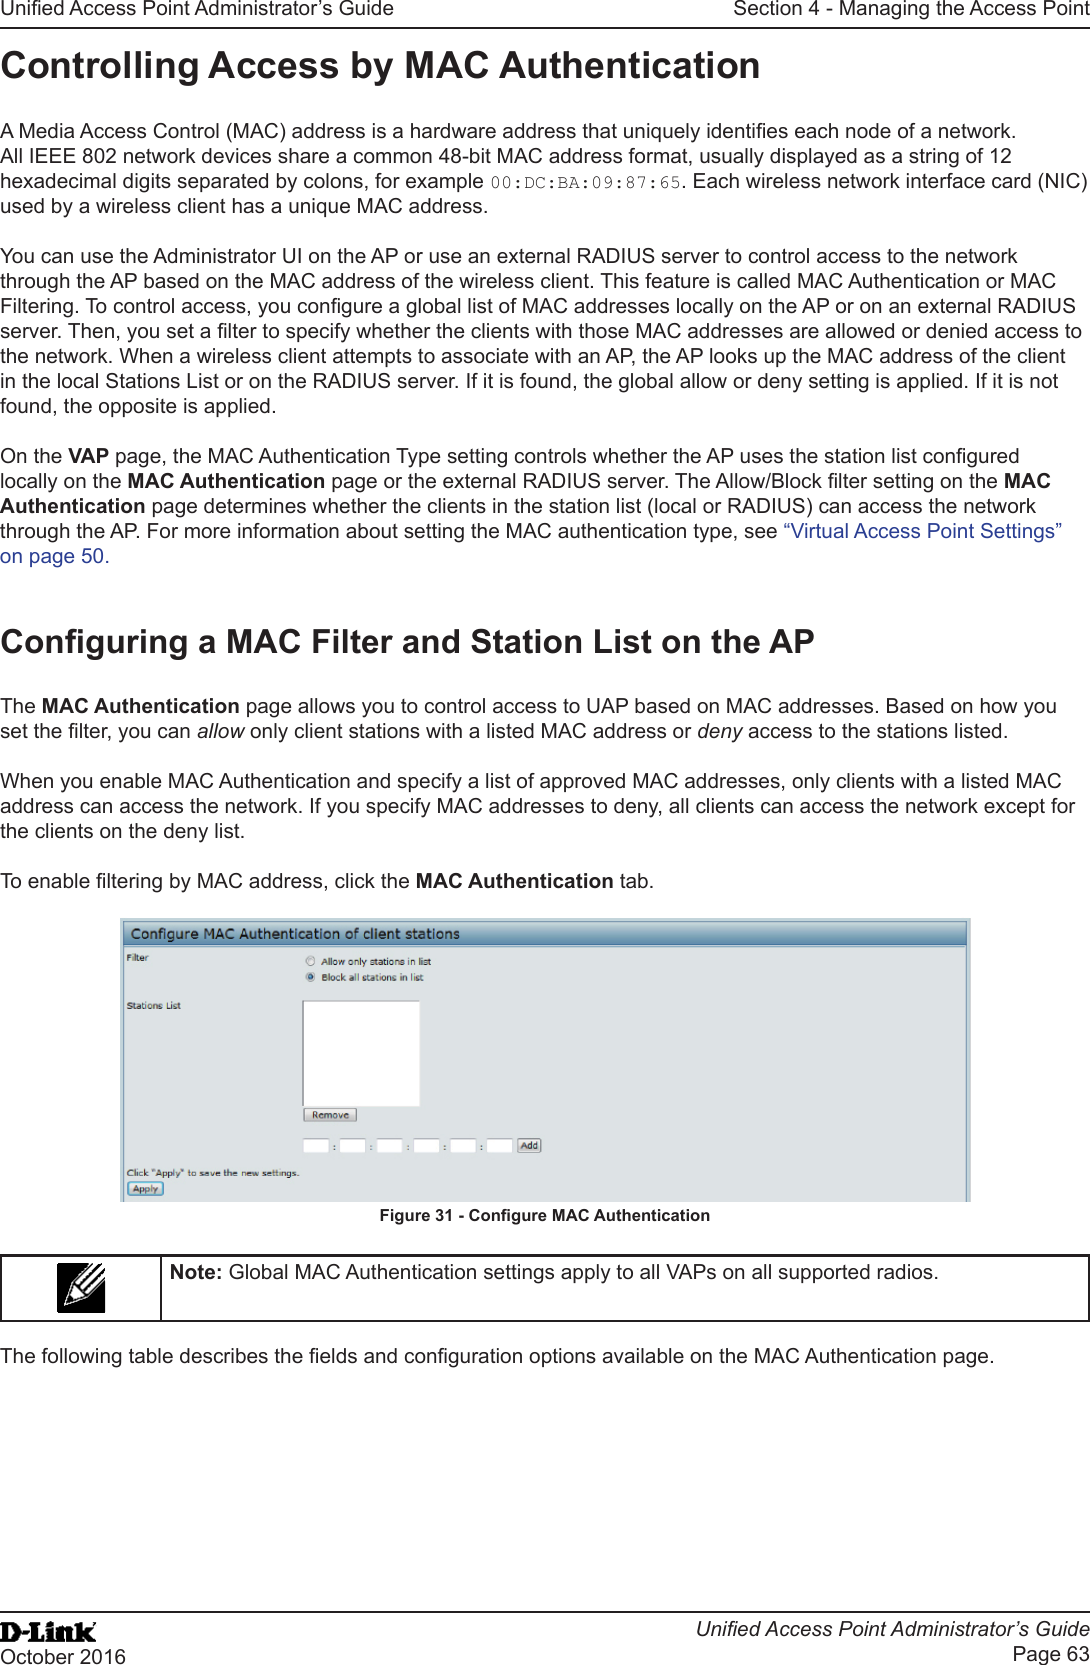 Unied Access Point Administrator’s GuideUnied Access Point Administrator’s GuidePage 63October 2016Section 4 - Managing the Access PointControlling Access by MAC AuthenticationA Media Access Control (MAC) address is a hardware address that uniquely identies each node of a network. All IEEE 802 network devices share a common 48-bit MAC address format, usually displayed as a string of 12 hexadecimal digits separated by colons, for example 00:DC:BA:09:87:65. Each wireless network interface card (NIC) used by a wireless client has a unique MAC address.You can use the Administrator UI on the AP or use an external RADIUS server to control access to the network through the AP based on the MAC address of the wireless client. This feature is called MAC Authentication or MAC Filtering. To control access, you congure a global list of MAC addresses locally on the AP or on an external RADIUS server. Then, you set a lter to specify whether the clients with those MAC addresses are allowed or denied access to the network. When a wireless client attempts to associate with an AP, the AP looks up the MAC address of the client in the local Stations List or on the RADIUS server. If it is found, the global allow or deny setting is applied. If it is not found, the opposite is applied.On the VAP page, the MAC Authentication Type setting controls whether the AP uses the station list congured locally on the MAC Authentication page or the external RADIUS server. The Allow/Block lter setting on the MAC Authentication page determines whether the clients in the station list (local or RADIUS) can access the network through the AP. For more information about setting the MAC authentication type, see “Virtual Access Point Settings” on page 50.Conguring a MAC Filter and Station List on the APThe MAC Authentication page allows you to control access to UAP based on MAC addresses. Based on how you set the lter, you can allow only client stations with a listed MAC address or deny access to the stations listed.When you enable MAC Authentication and specify a list of approved MAC addresses, only clients with a listed MAC address can access the network. If you specify MAC addresses to deny, all clients can access the network except for the clients on the deny list.To enable ltering by MAC address, click the MAC Authentication tab.Figure 31 - Congure MAC AuthenticationNote: Global MAC Authentication settings apply to all VAPs on all supported radios.The following table describes the elds and conguration options available on the MAC Authentication page.